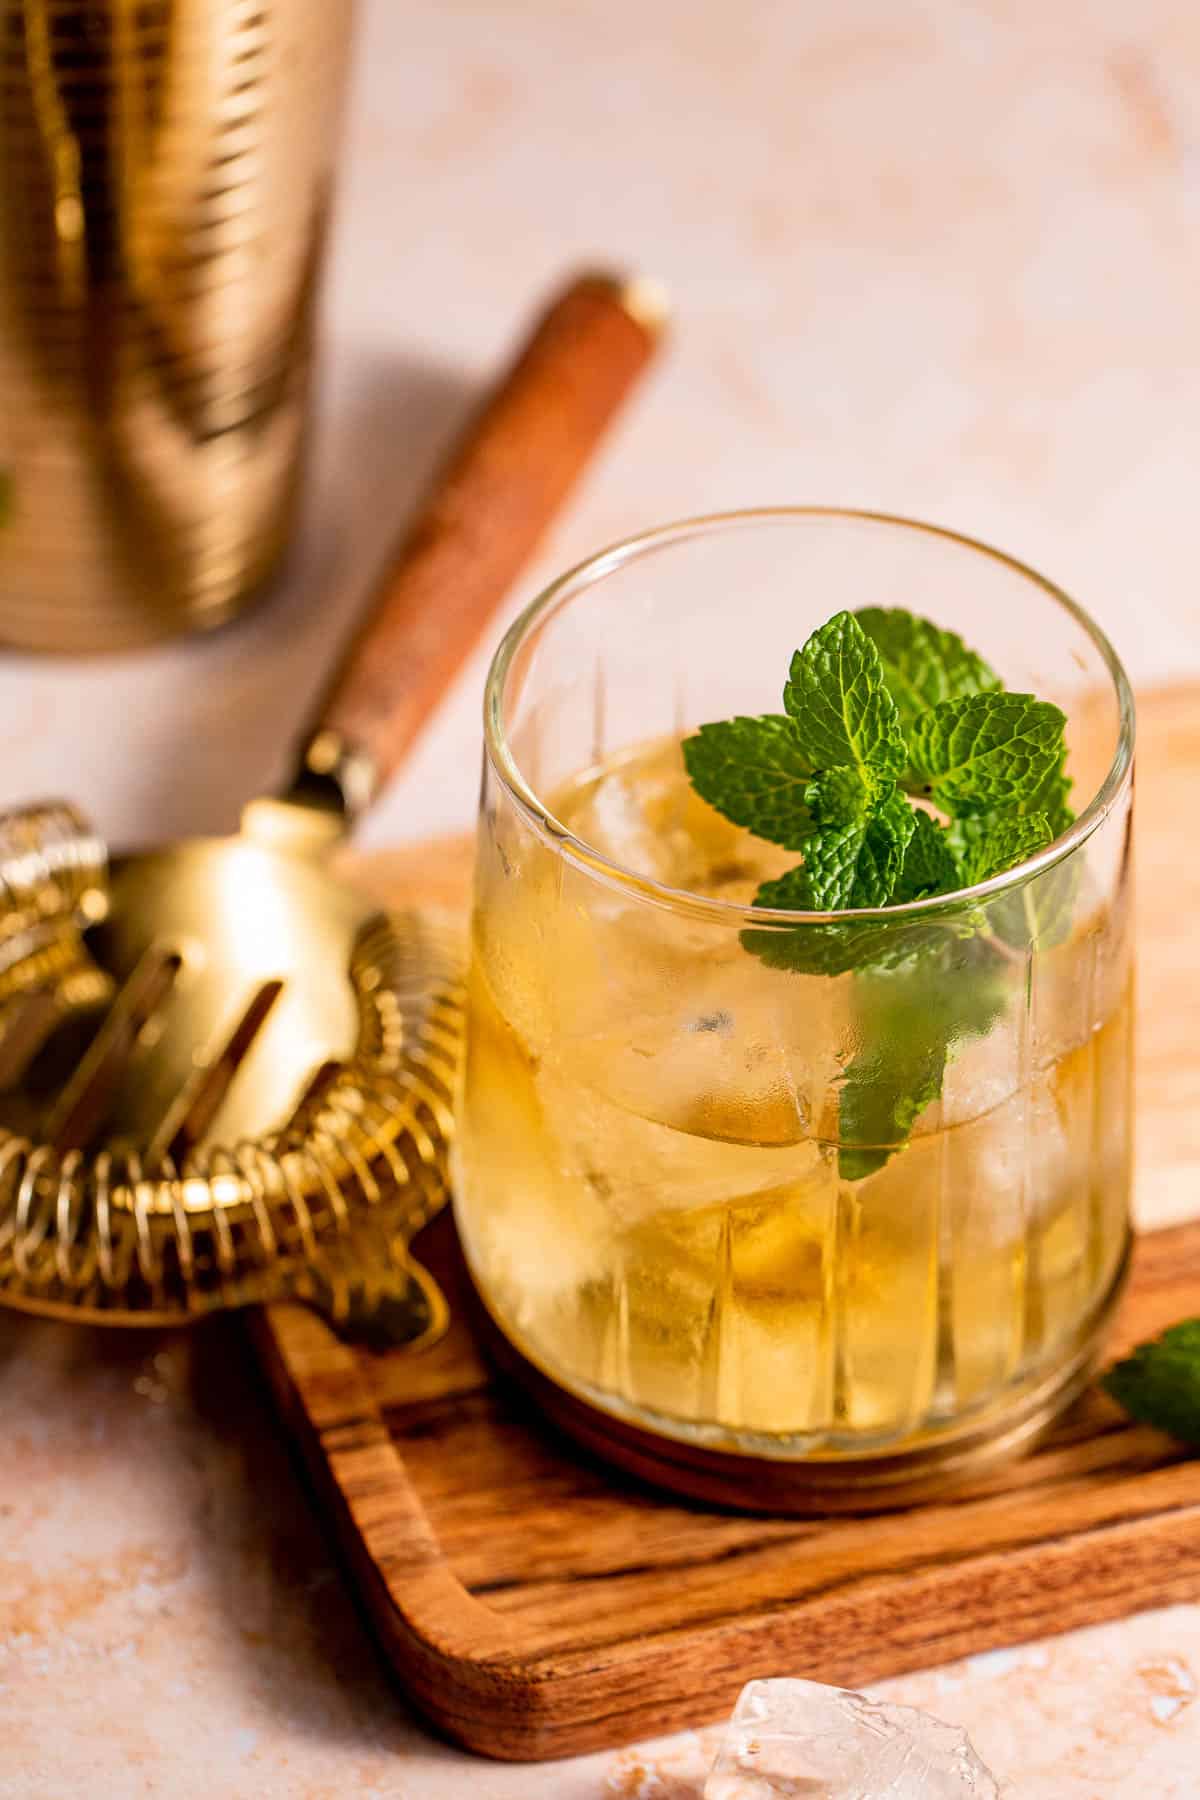 A Stinger Cocktail served with fresh mint and ice on a wooden serving board.